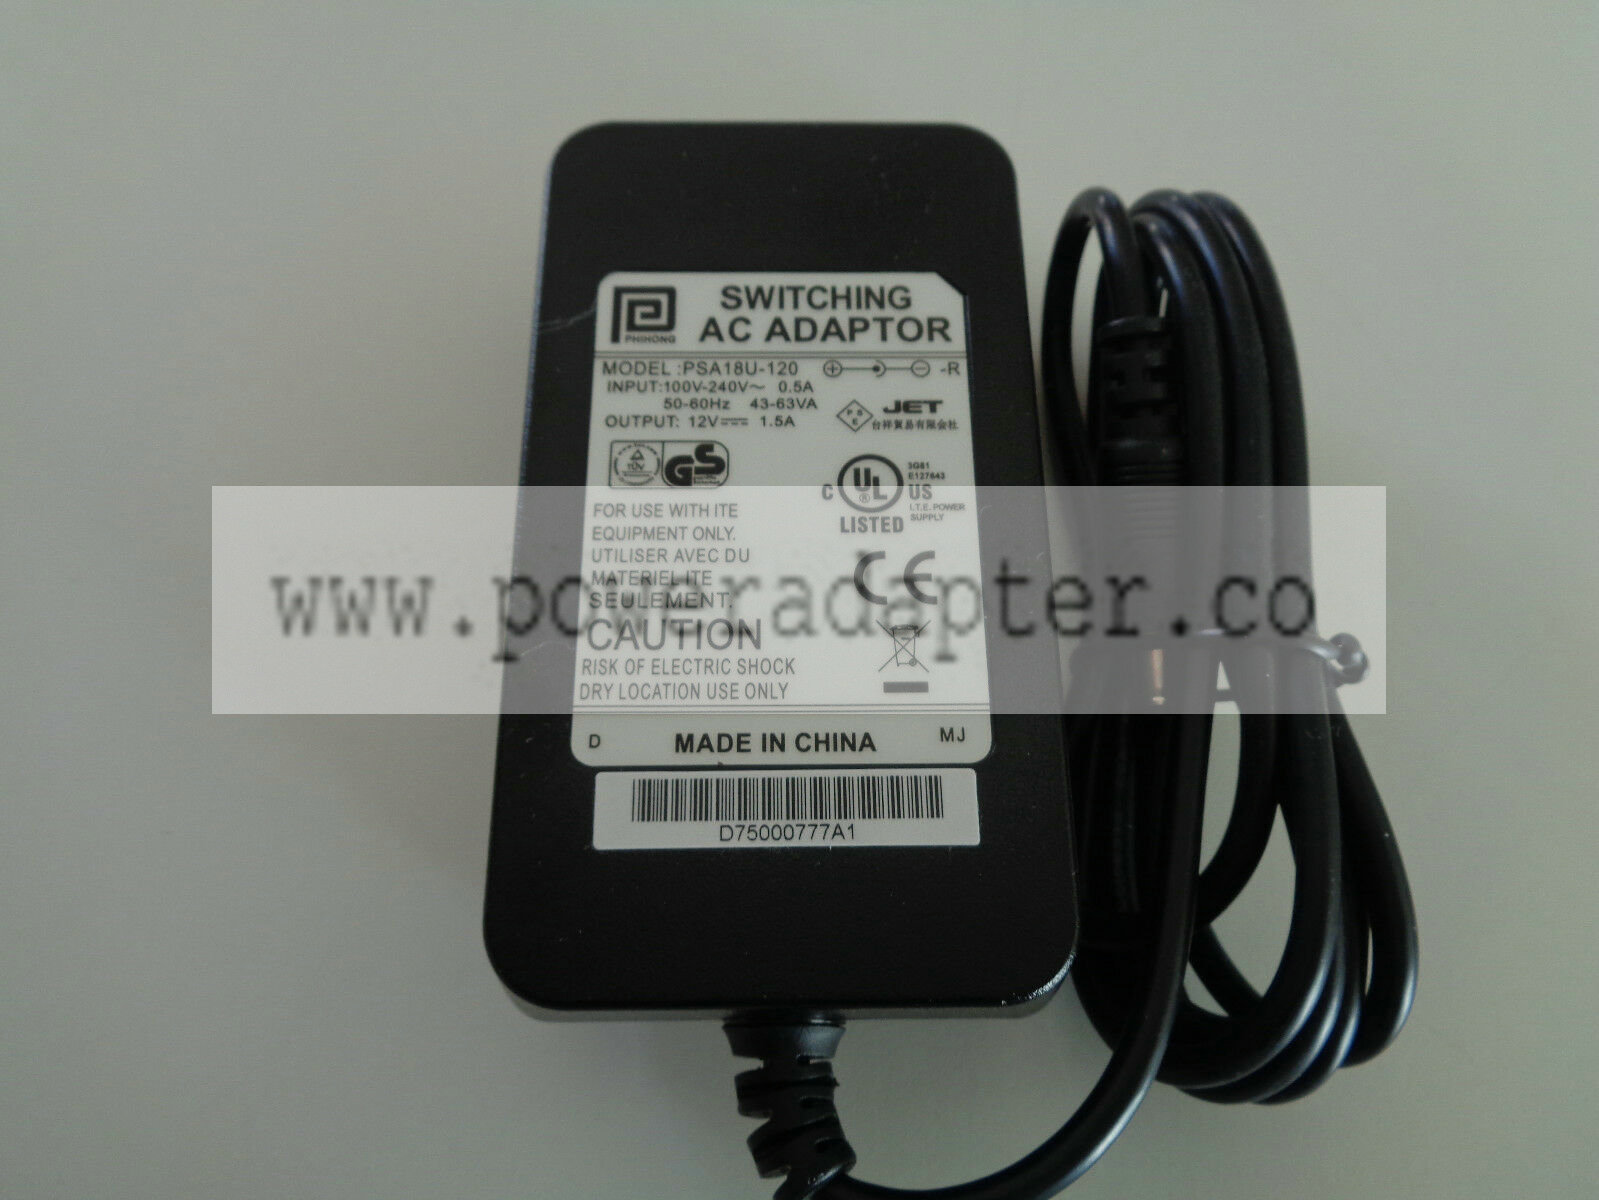 AC Adapter Power Supply Phihong PSA18U-120 Switching 12V 1.5A New Brand: Philong Maximum Current Output: 1.5A MPN: PS